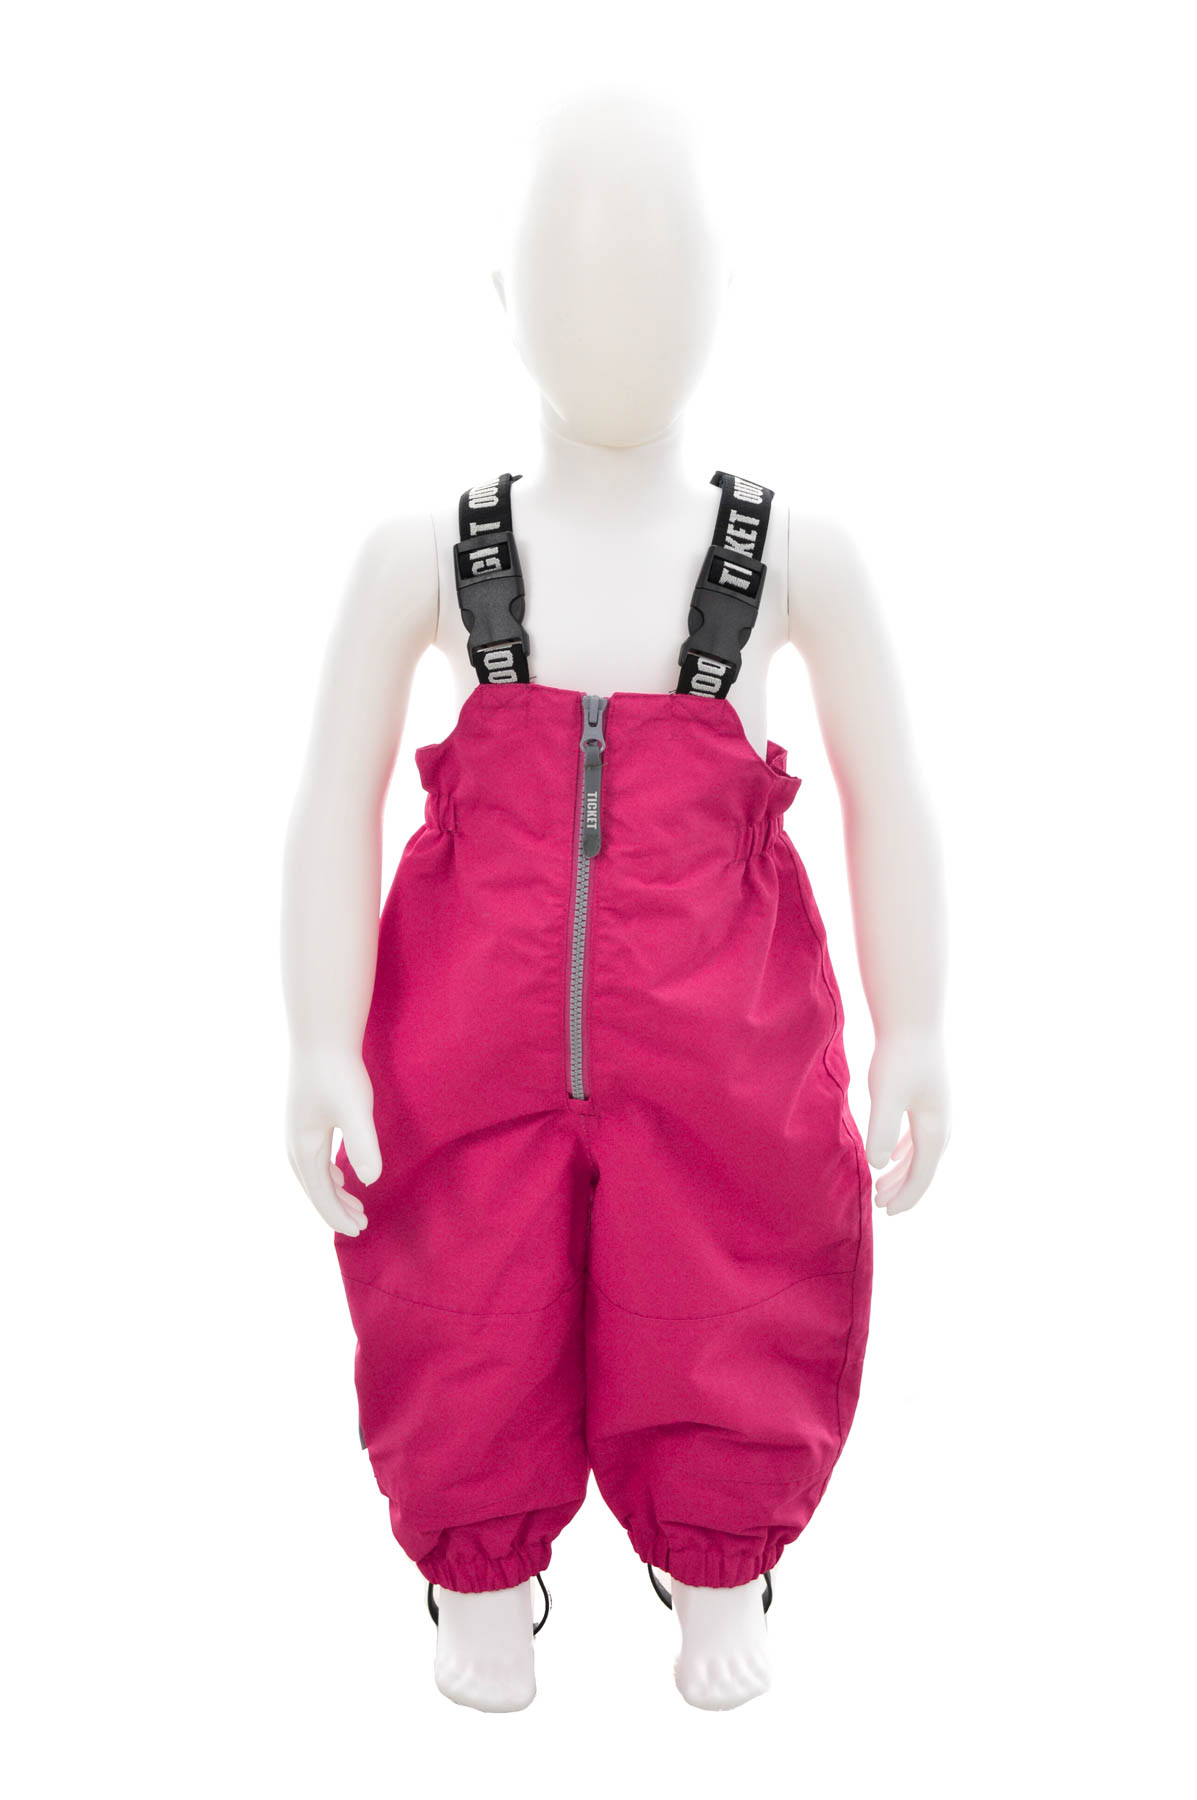 Baby's jumpsuit for girl - TICKET TO HEAVEN - 0